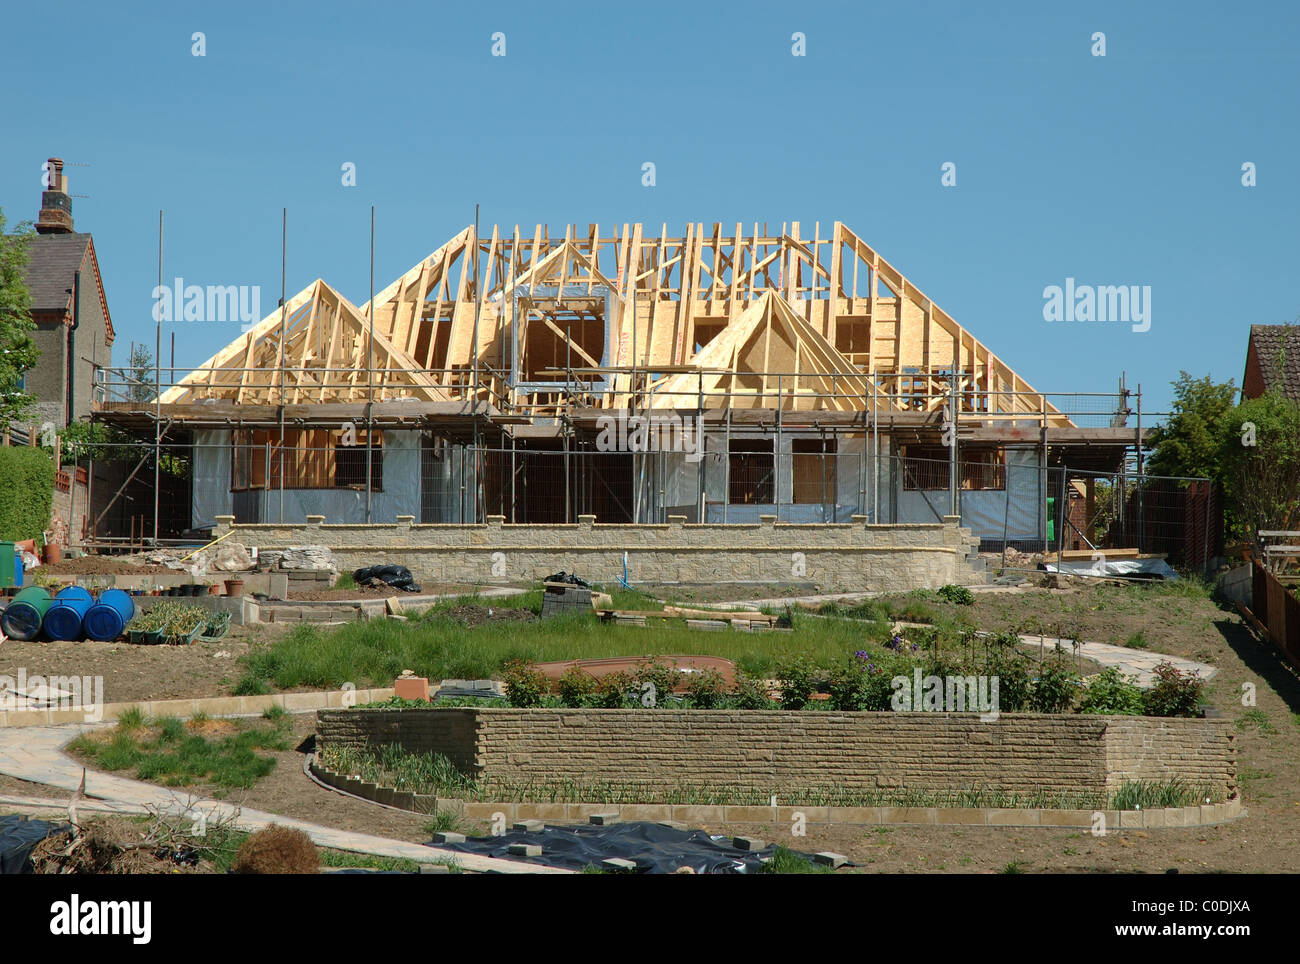 bungalow being built, Barrow upon Soar, Leicestershire, England, UK Stock Photo